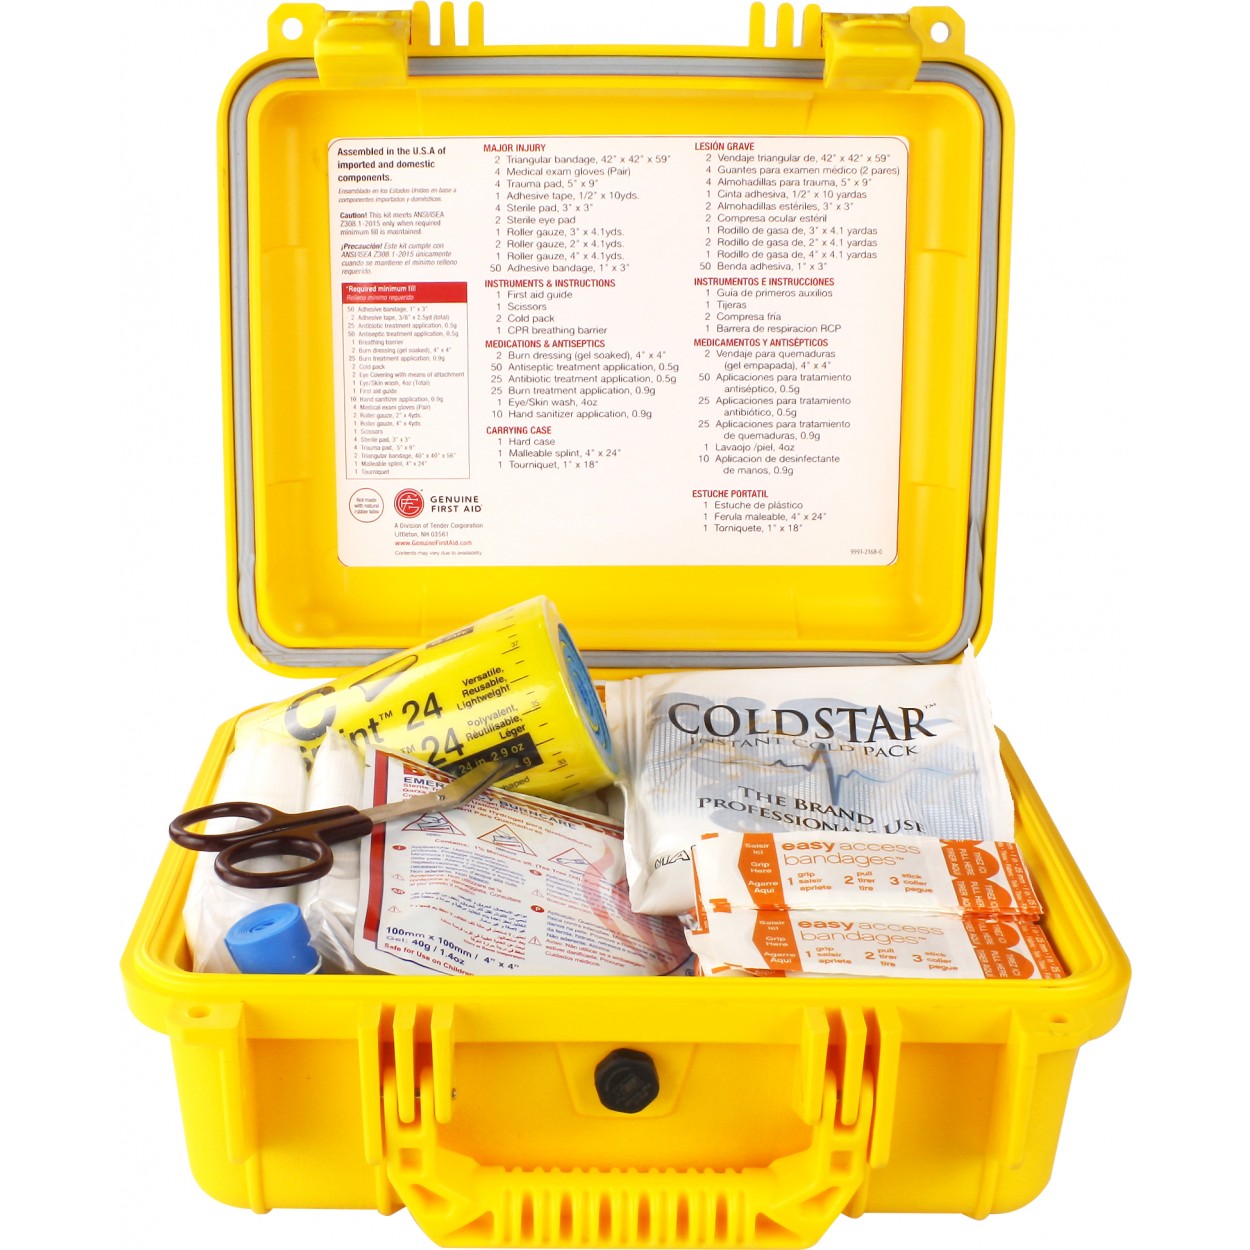 Genuine First Aid 50 Person ANSI Class B Type IV Waterproof First Aid Kit from GME Supply